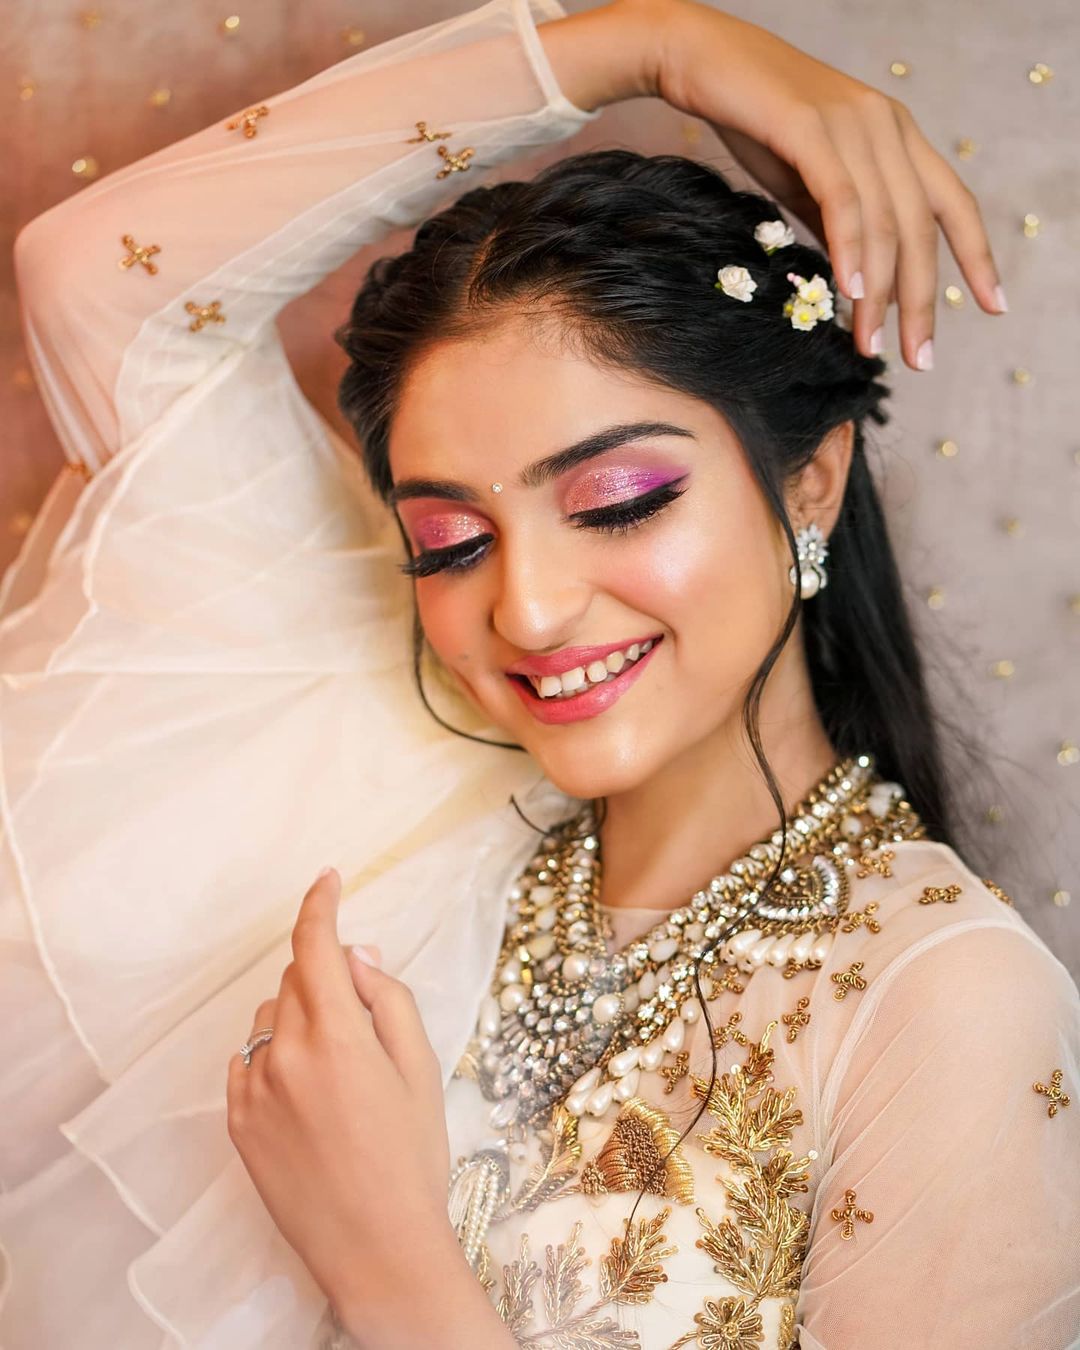 The Bride Donned A Rose Pink 'Lehenga' With Open Hairstyle For Her Day  Wedding